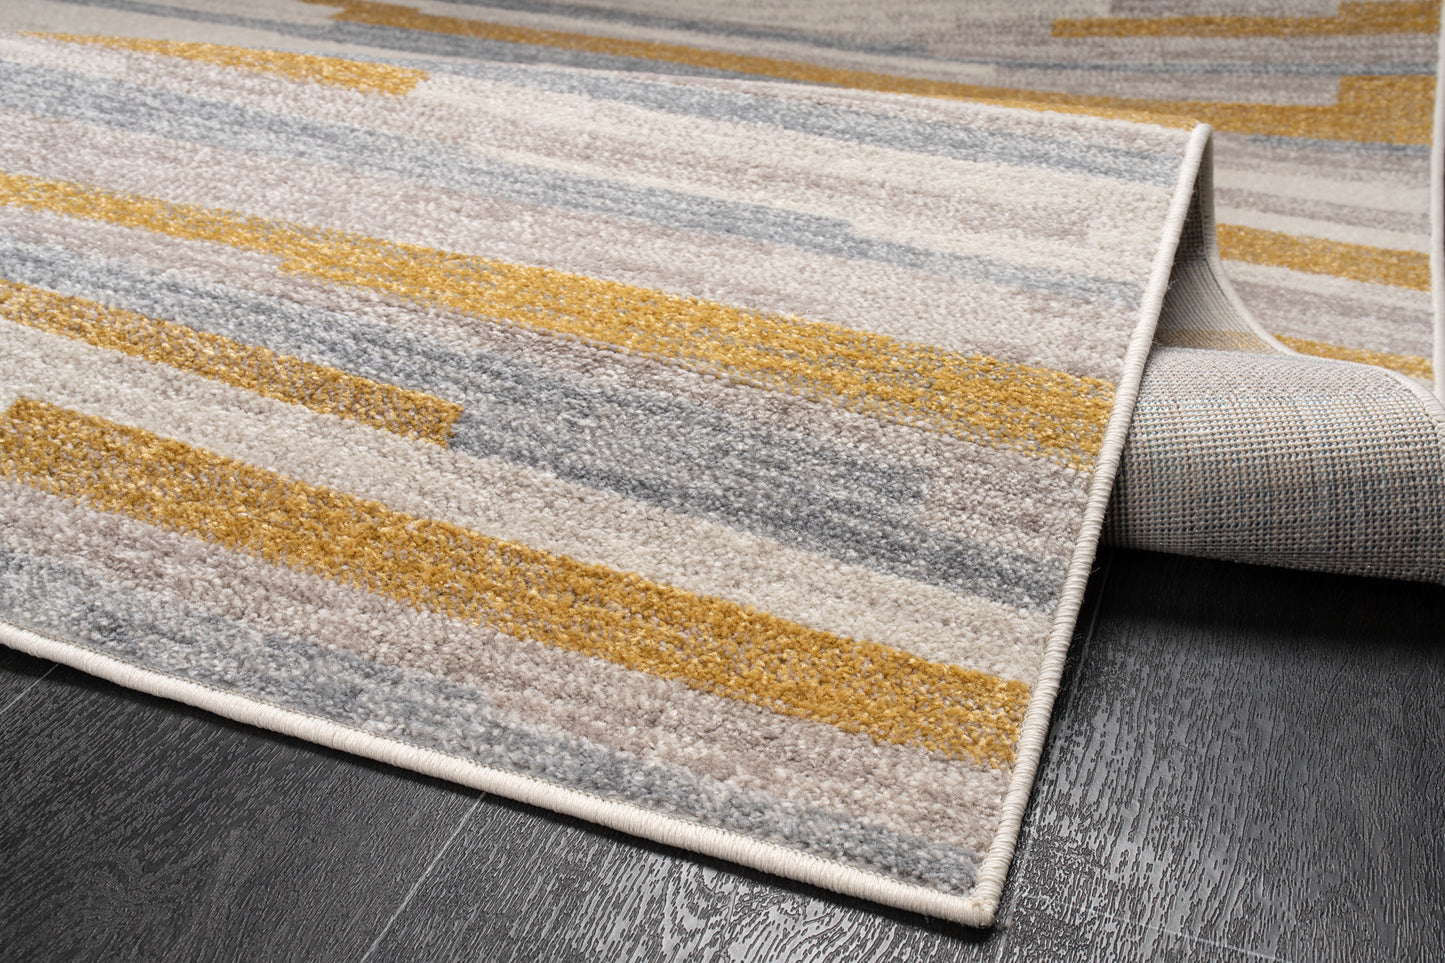 LaDole Rugs Abstract Striped Rustic Minimalist Contemporary Area Rug - Modern Carpet for Living Room, Bedroom, Office, Entrance, and Hallway - Mustard Yellow, Grey, and Beige